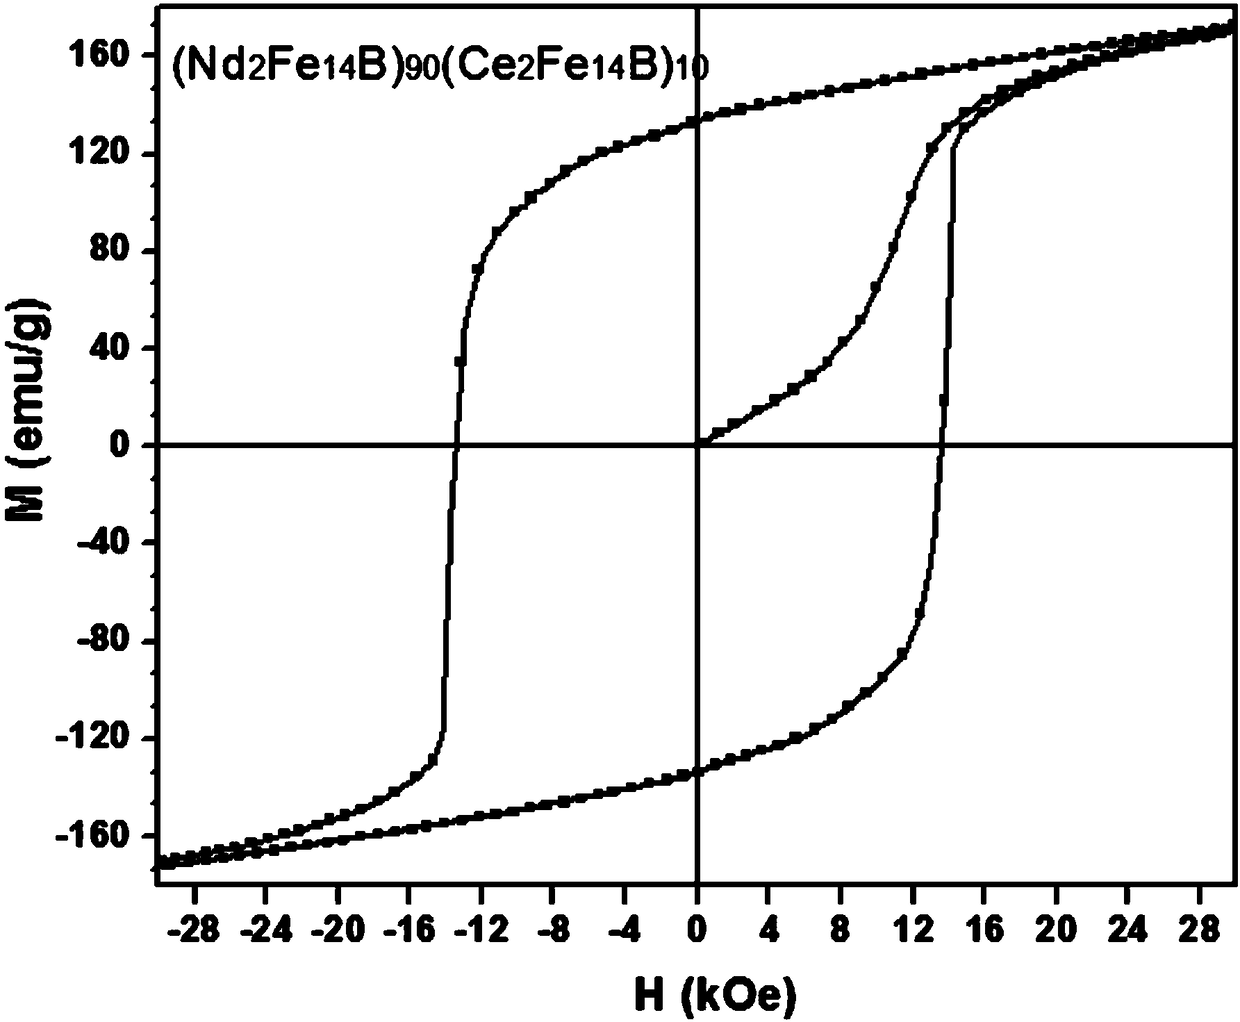 A dual main phase nd2fe14b-ce2fe14b composite permanent magnet and preparation method thereof